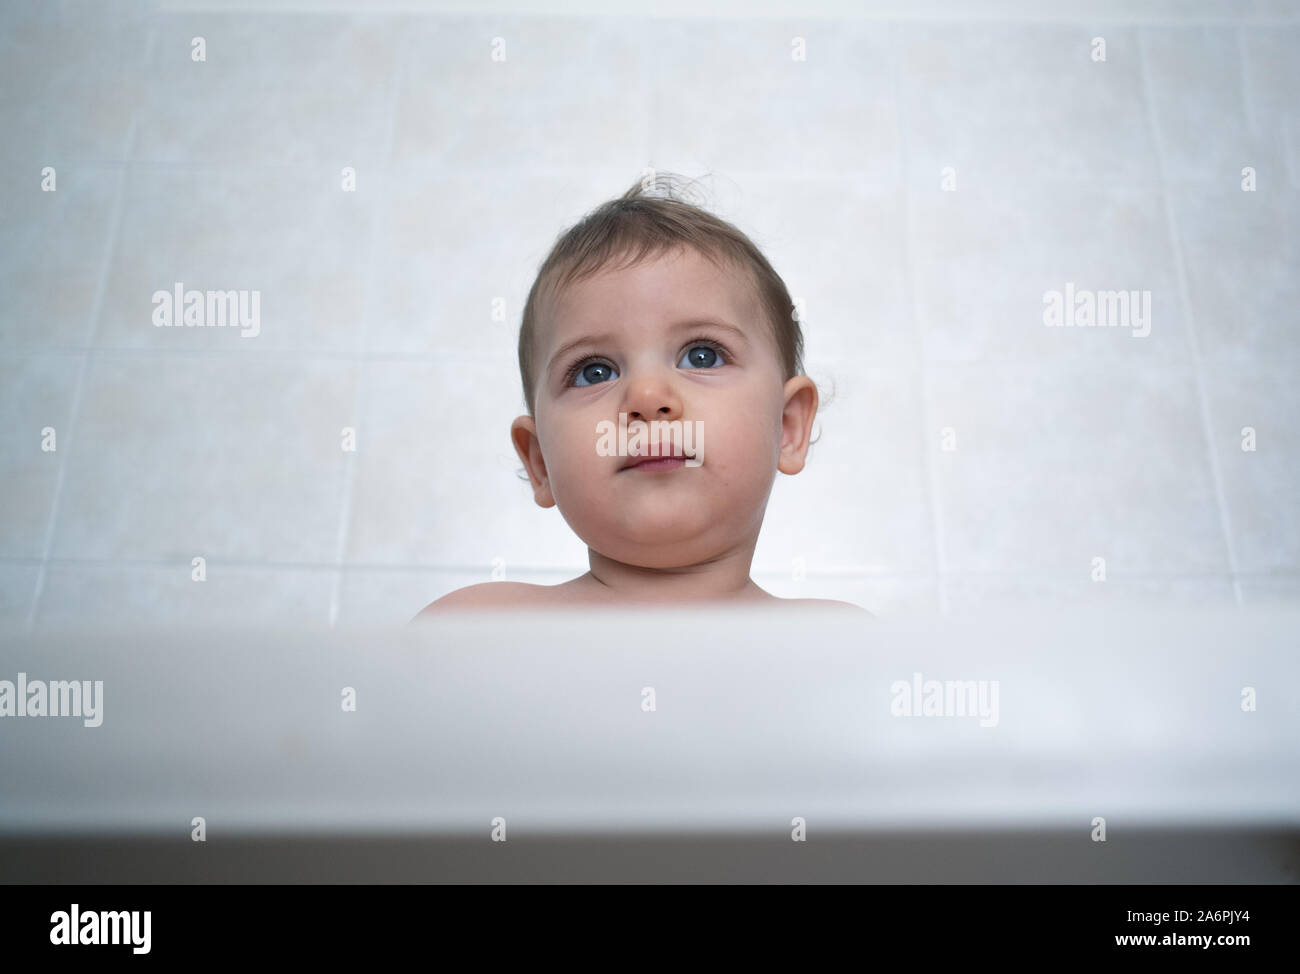 1 year old female baby sits in a high chair waiting for her meal Stock Photo